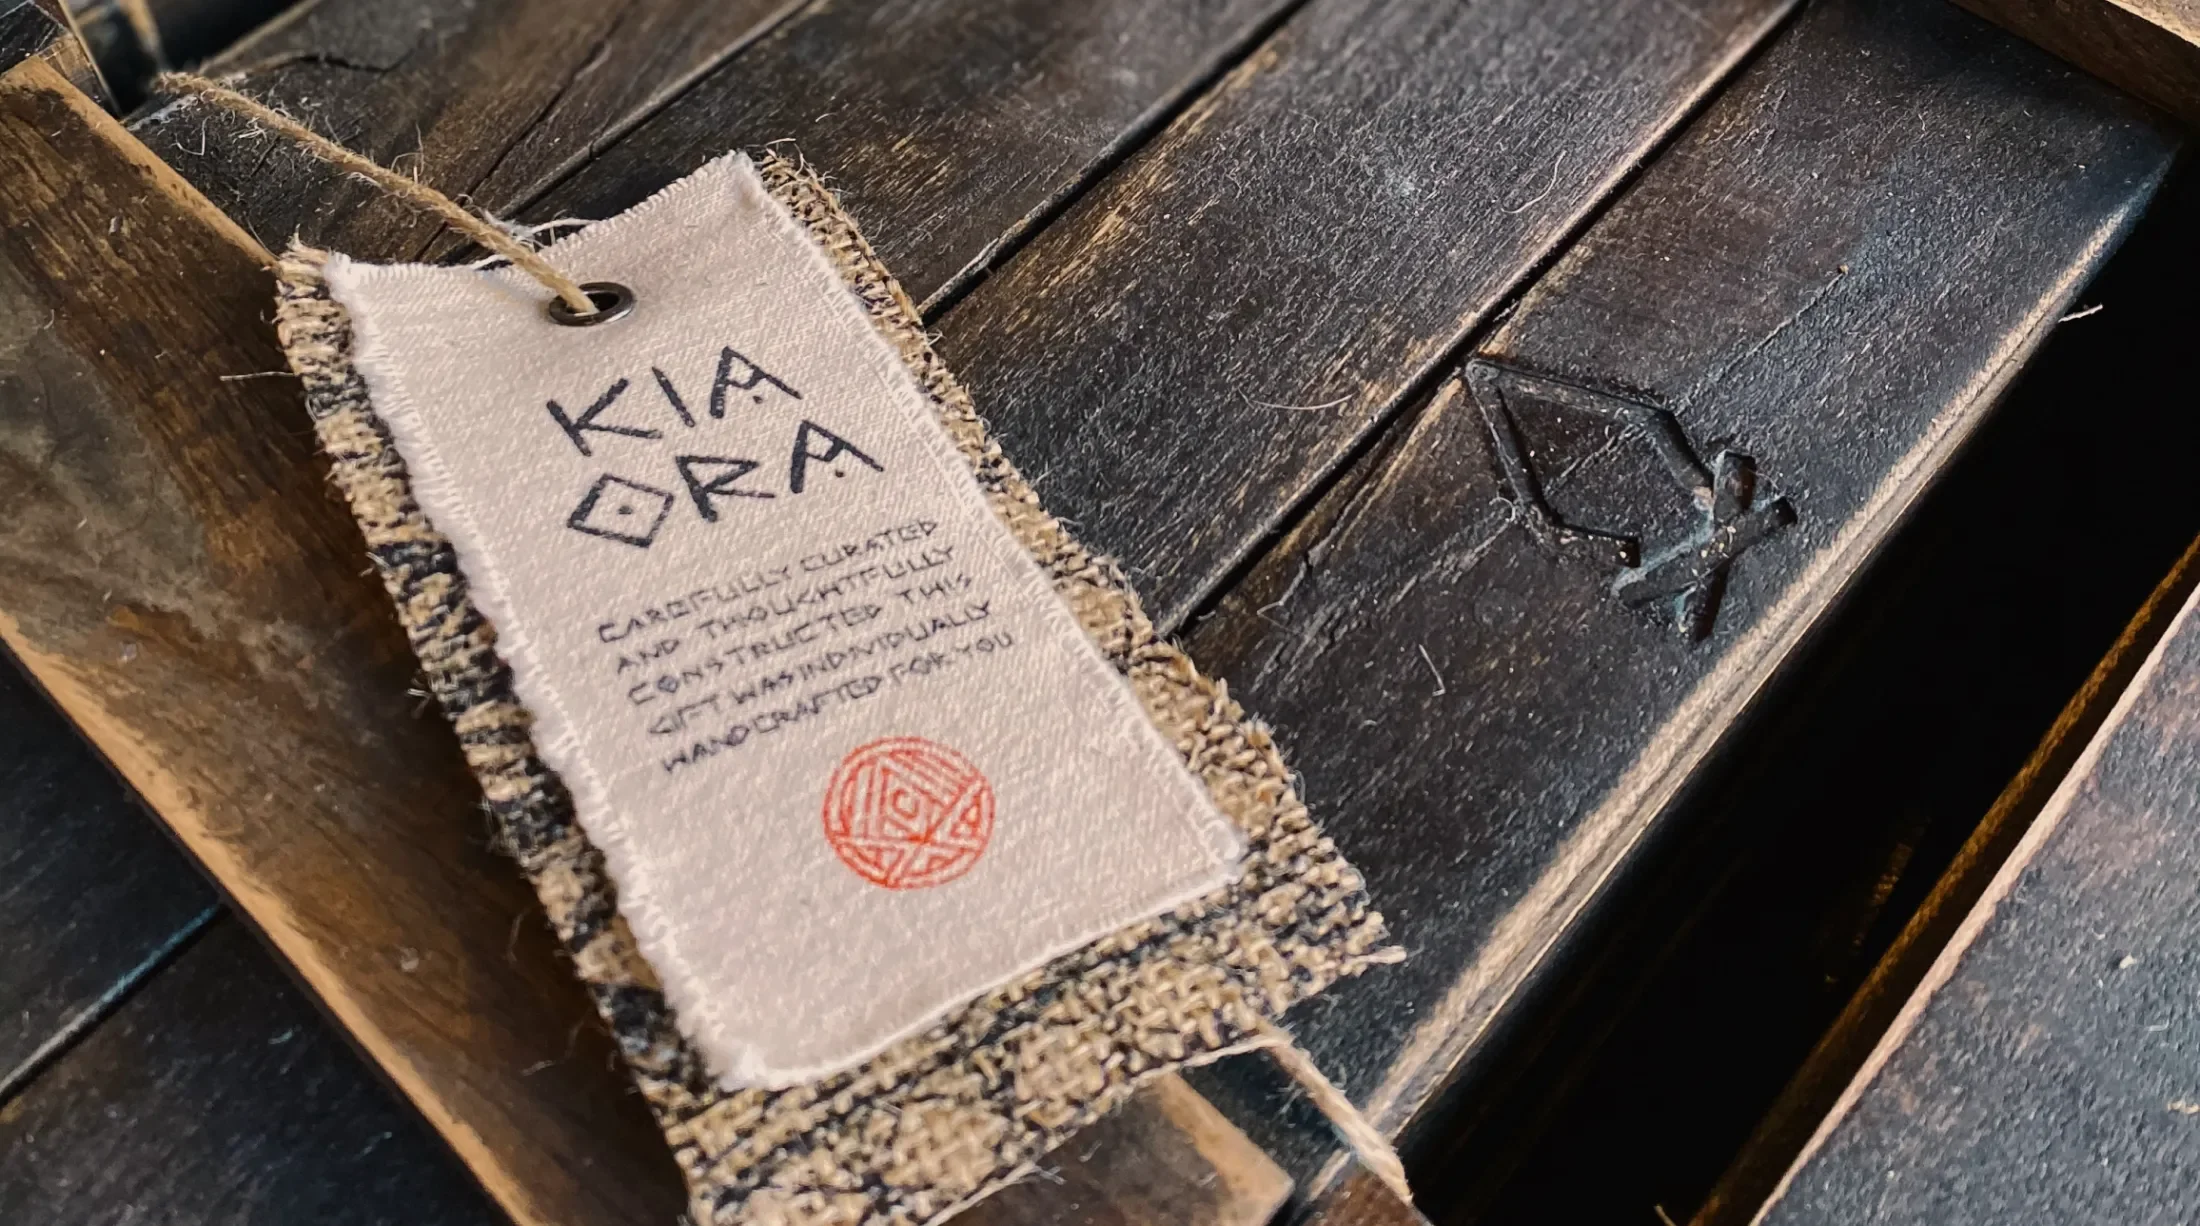 Packaging exterior, close-up on the bonfire brand and the screenprinted cloth tag which reads "Kia ora carefully crafted and thoughtfully constructed this gift was individually handcrafted for you"